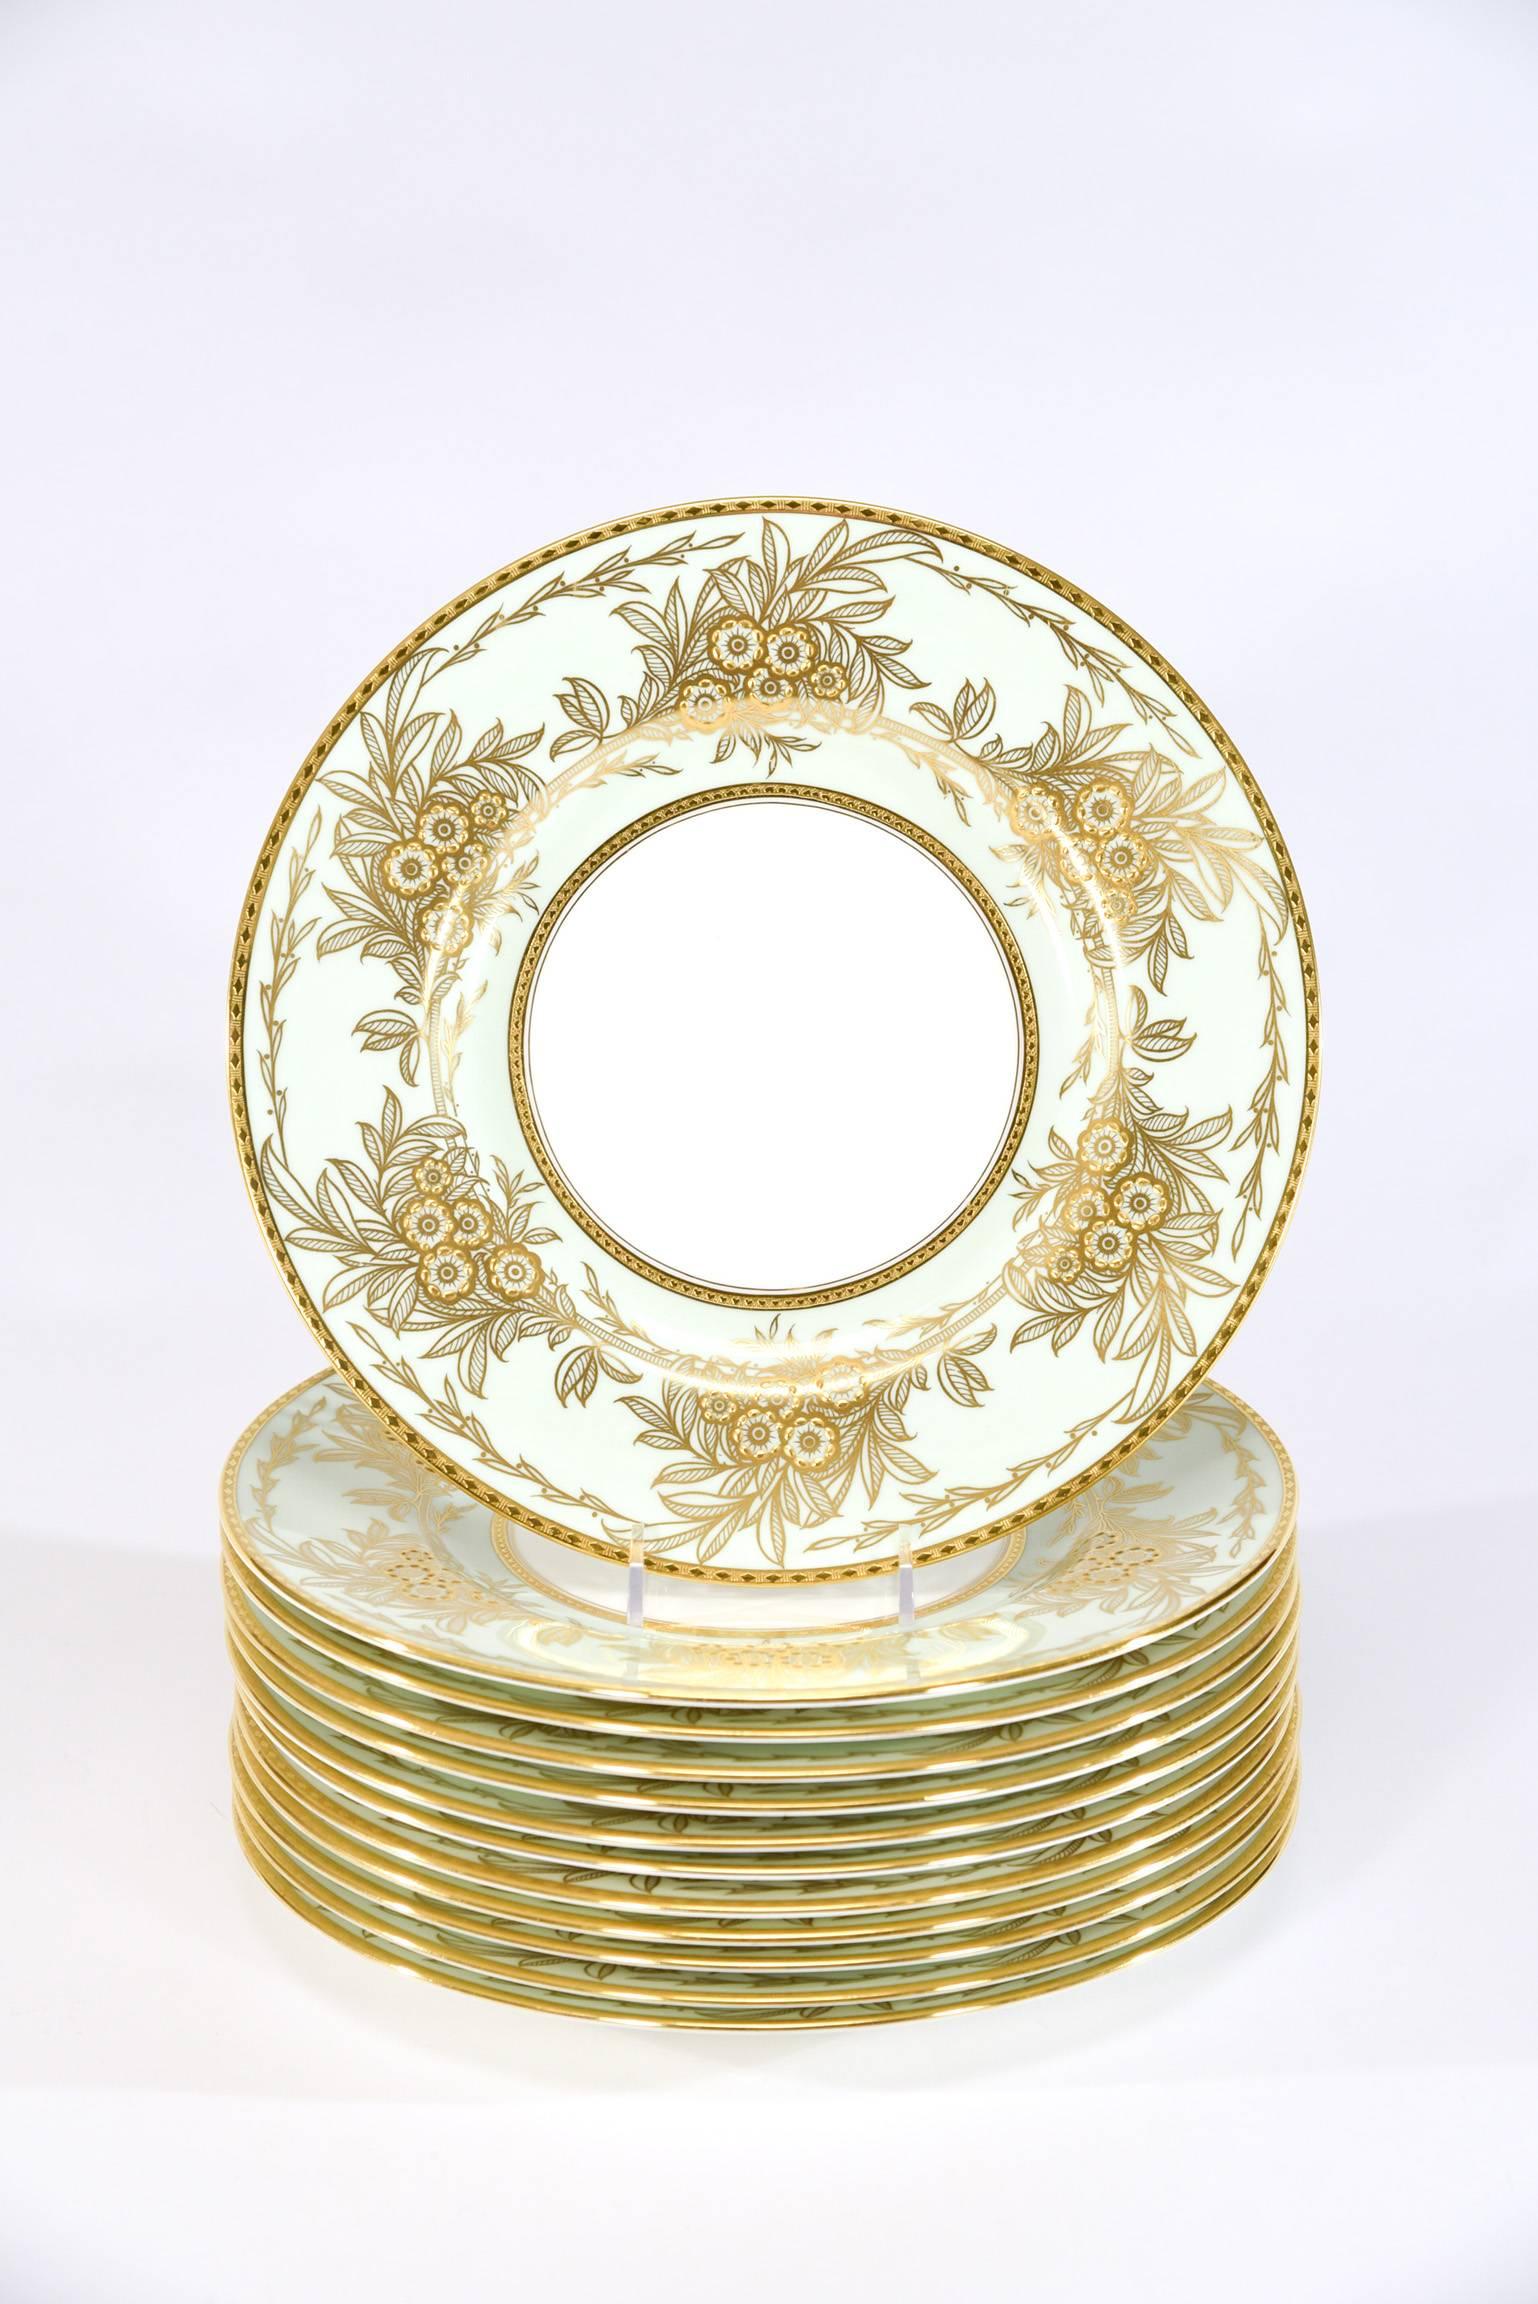 This set of 13 Minton dinner plates feature the iconic "Eau de Nils" enamel border which is a soft blue green, described as the "water of the Nile". The clean white centres are framed with a lovely raised paste gold floral Arts